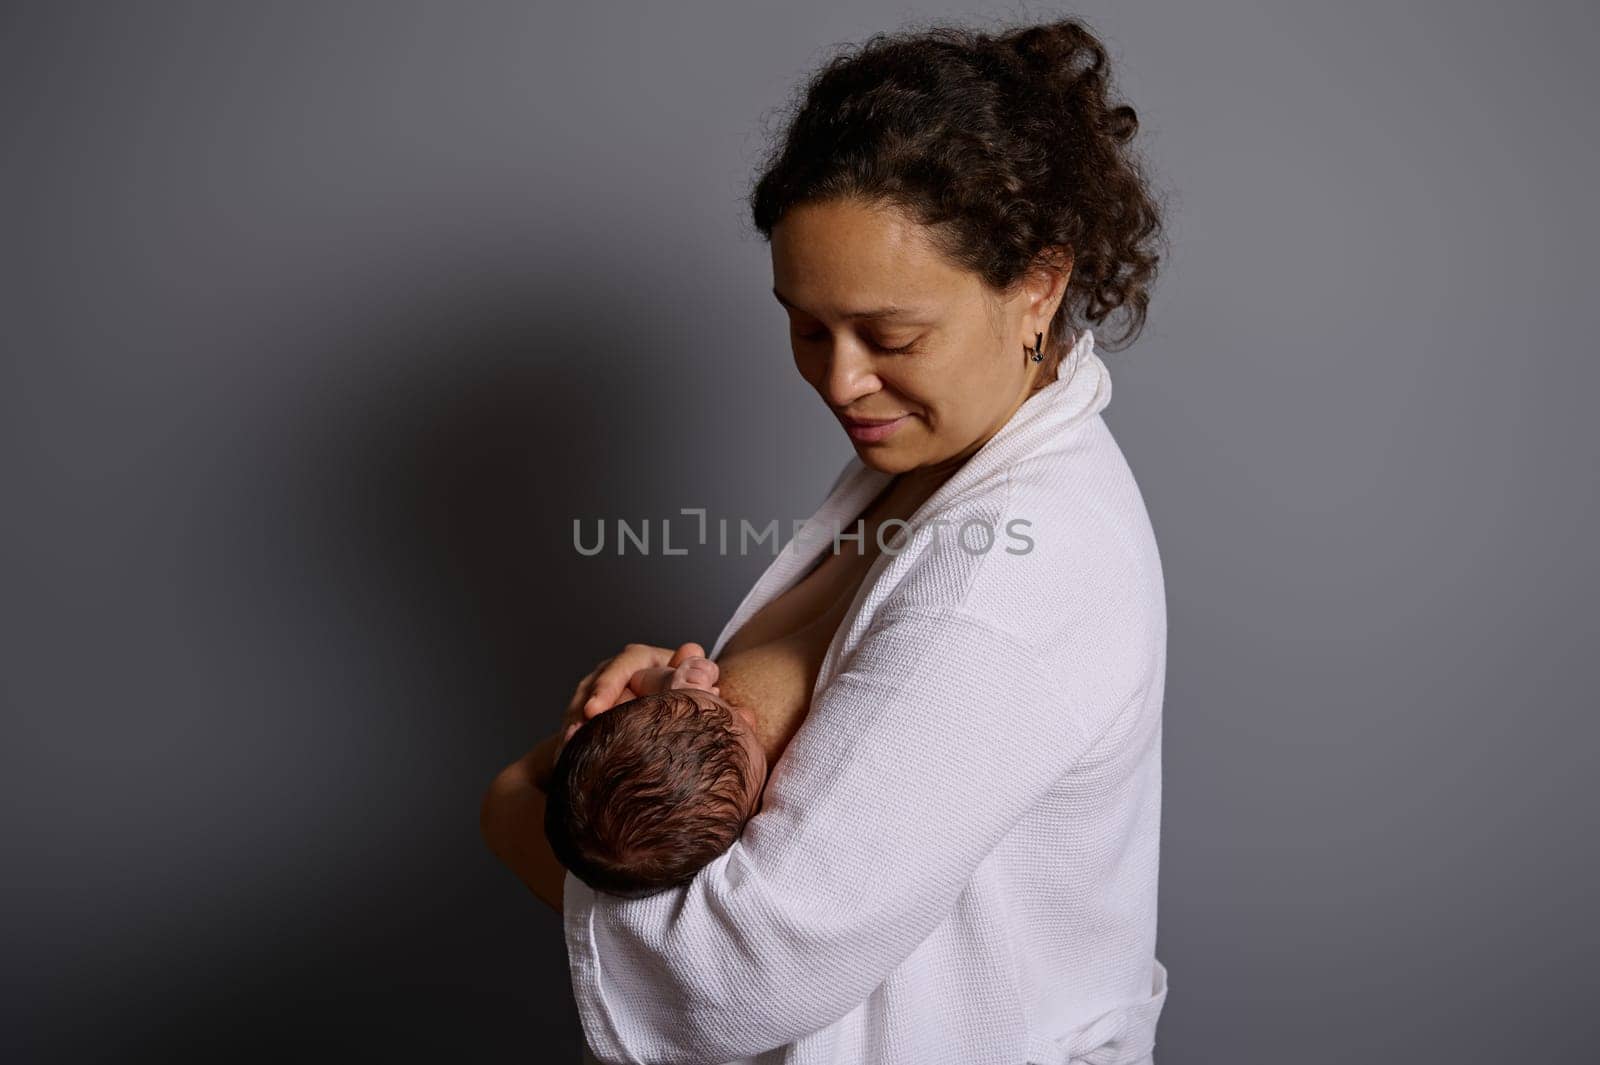 Authentic studio portrait of African American pretty woman, young mother smiling looking at her newborn baby, while breastfeeding him. People. Maternity leave. Healthy lifestyle